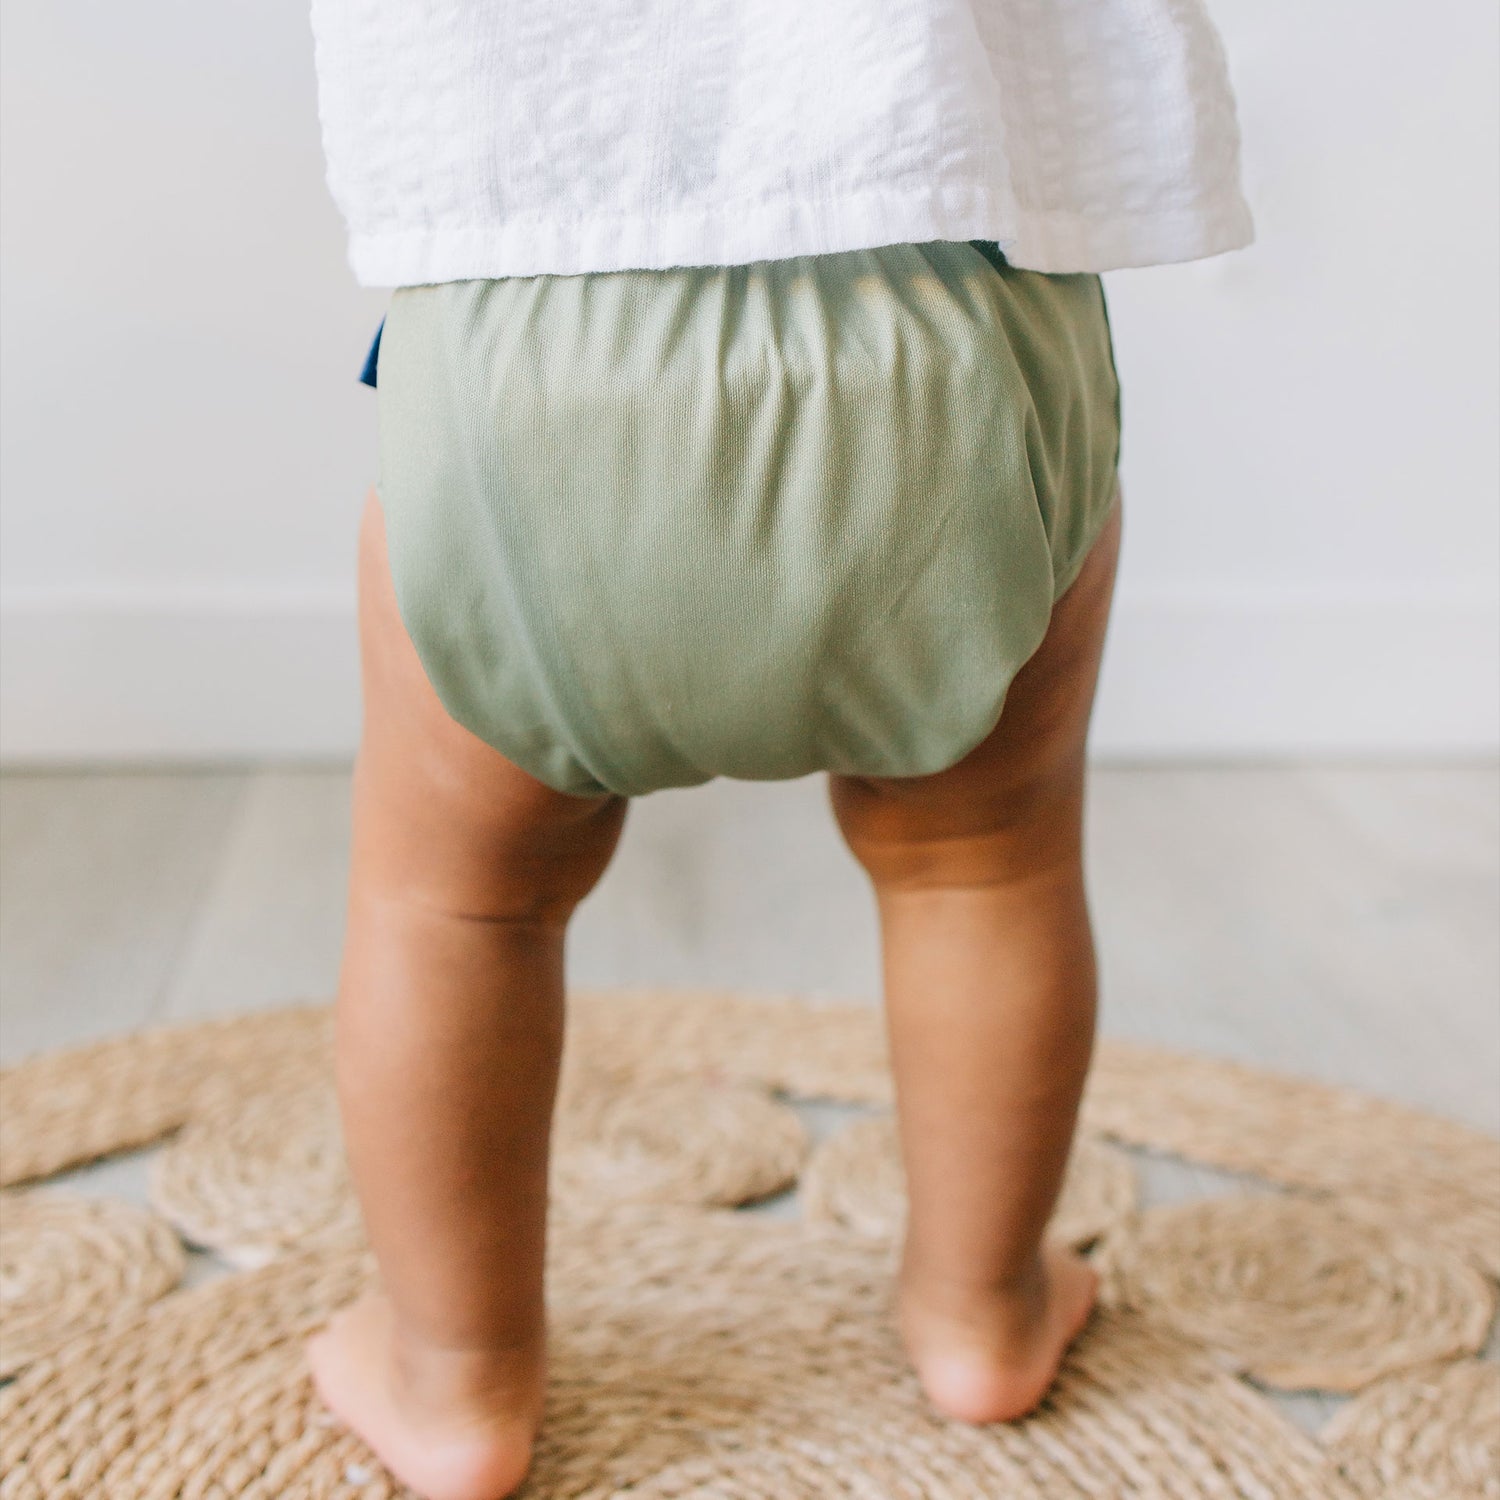 best pocket diaper brands in the usa modern reusable diapers for babies from birth to potty training fits most babies from seven to sixty pounds machine washable cloth diapers with athletic wicking jersey sage green neutral parenting 